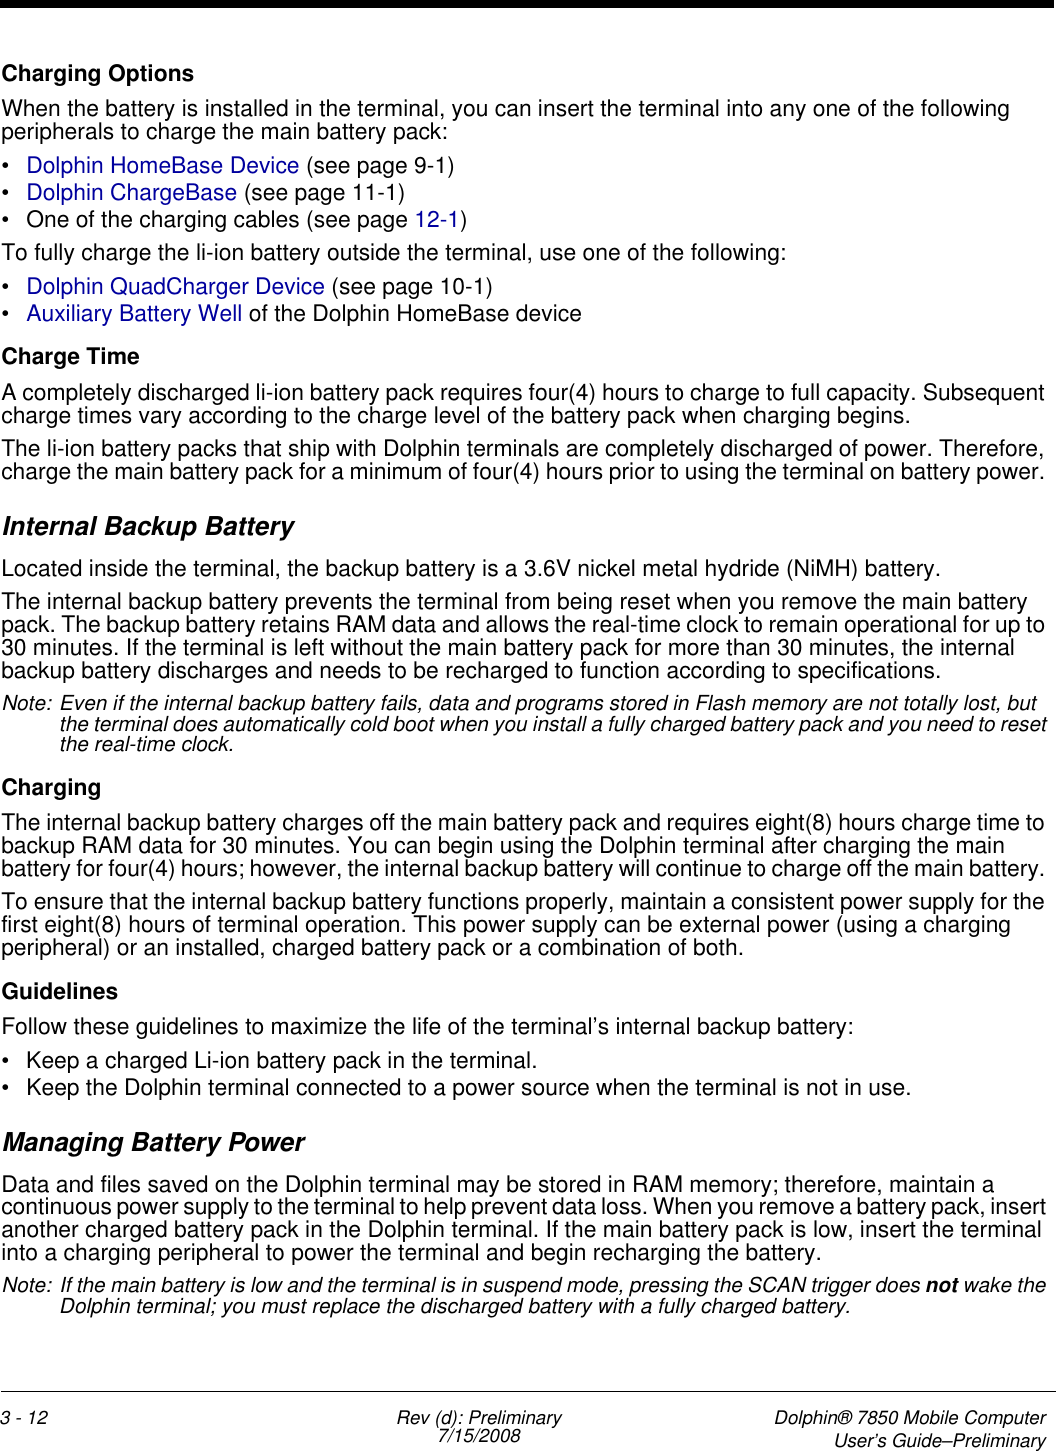 3 - 12 Rev (d): Preliminary7/15/2008 Dolphin® 7850 Mobile ComputerUser’s Guide–PreliminaryCharging OptionsWhen the battery is installed in the terminal, you can insert the terminal into any one of the following peripherals to charge the main battery pack:•Dolphin HomeBase Device (see page 9-1)•Dolphin ChargeBase (see page 11-1) • One of the charging cables (see page 12-1)To fully charge the li-ion battery outside the terminal, use one of the following:•Dolphin QuadCharger Device (see page 10-1)•Auxiliary Battery Well of the Dolphin HomeBase deviceCharge TimeA completely discharged li-ion battery pack requires four(4) hours to charge to full capacity. Subsequent charge times vary according to the charge level of the battery pack when charging begins. The li-ion battery packs that ship with Dolphin terminals are completely discharged of power. Therefore, charge the main battery pack for a minimum of four(4) hours prior to using the terminal on battery power. Internal Backup BatteryLocated inside the terminal, the backup battery is a 3.6V nickel metal hydride (NiMH) battery. The internal backup battery prevents the terminal from being reset when you remove the main battery pack. The backup battery retains RAM data and allows the real-time clock to remain operational for up to 30 minutes. If the terminal is left without the main battery pack for more than 30 minutes, the internal backup battery discharges and needs to be recharged to function according to specifications.  Note: Even if the internal backup battery fails, data and programs stored in Flash memory are not totally lost, but the terminal does automatically cold boot when you install a fully charged battery pack and you need to reset the real-time clock.ChargingThe internal backup battery charges off the main battery pack and requires eight(8) hours charge time to backup RAM data for 30 minutes. You can begin using the Dolphin terminal after charging the main battery for four(4) hours; however, the internal backup battery will continue to charge off the main battery. To ensure that the internal backup battery functions properly, maintain a consistent power supply for the first eight(8) hours of terminal operation. This power supply can be external power (using a charging peripheral) or an installed, charged battery pack or a combination of both.Guidelines Follow these guidelines to maximize the life of the terminal’s internal backup battery:• Keep a charged Li-ion battery pack in the terminal. • Keep the Dolphin terminal connected to a power source when the terminal is not in use. Managing Battery PowerData and files saved on the Dolphin terminal may be stored in RAM memory; therefore, maintain a continuous power supply to the terminal to help prevent data loss. When you remove a battery pack, insert another charged battery pack in the Dolphin terminal. If the main battery pack is low, insert the terminal into a charging peripheral to power the terminal and begin recharging the battery.Note: If the main battery is low and the terminal is in suspend mode, pressing the SCAN trigger does not wake the Dolphin terminal; you must replace the discharged battery with a fully charged battery.